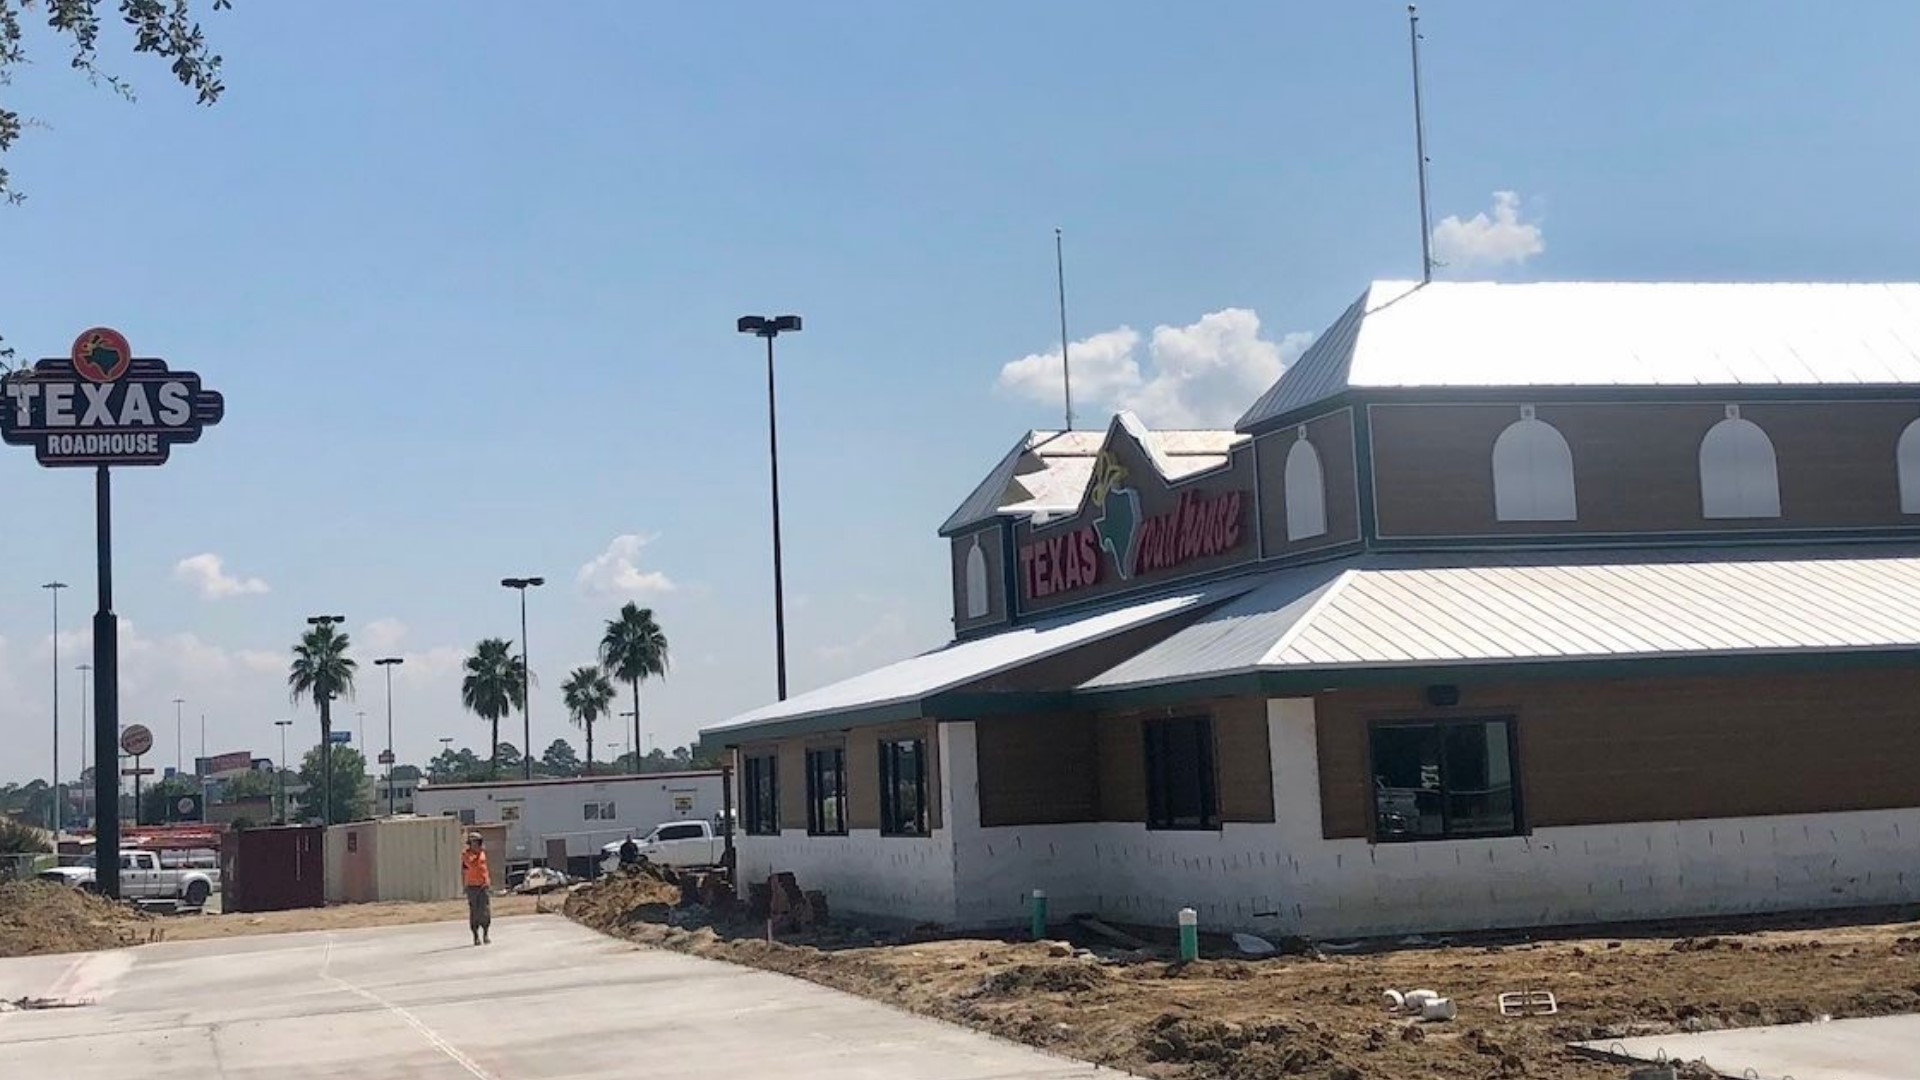 A Lone Star staple is set to open soon near Parkdale Mall and kept its promise of bringing more than 200 jobs to the area.